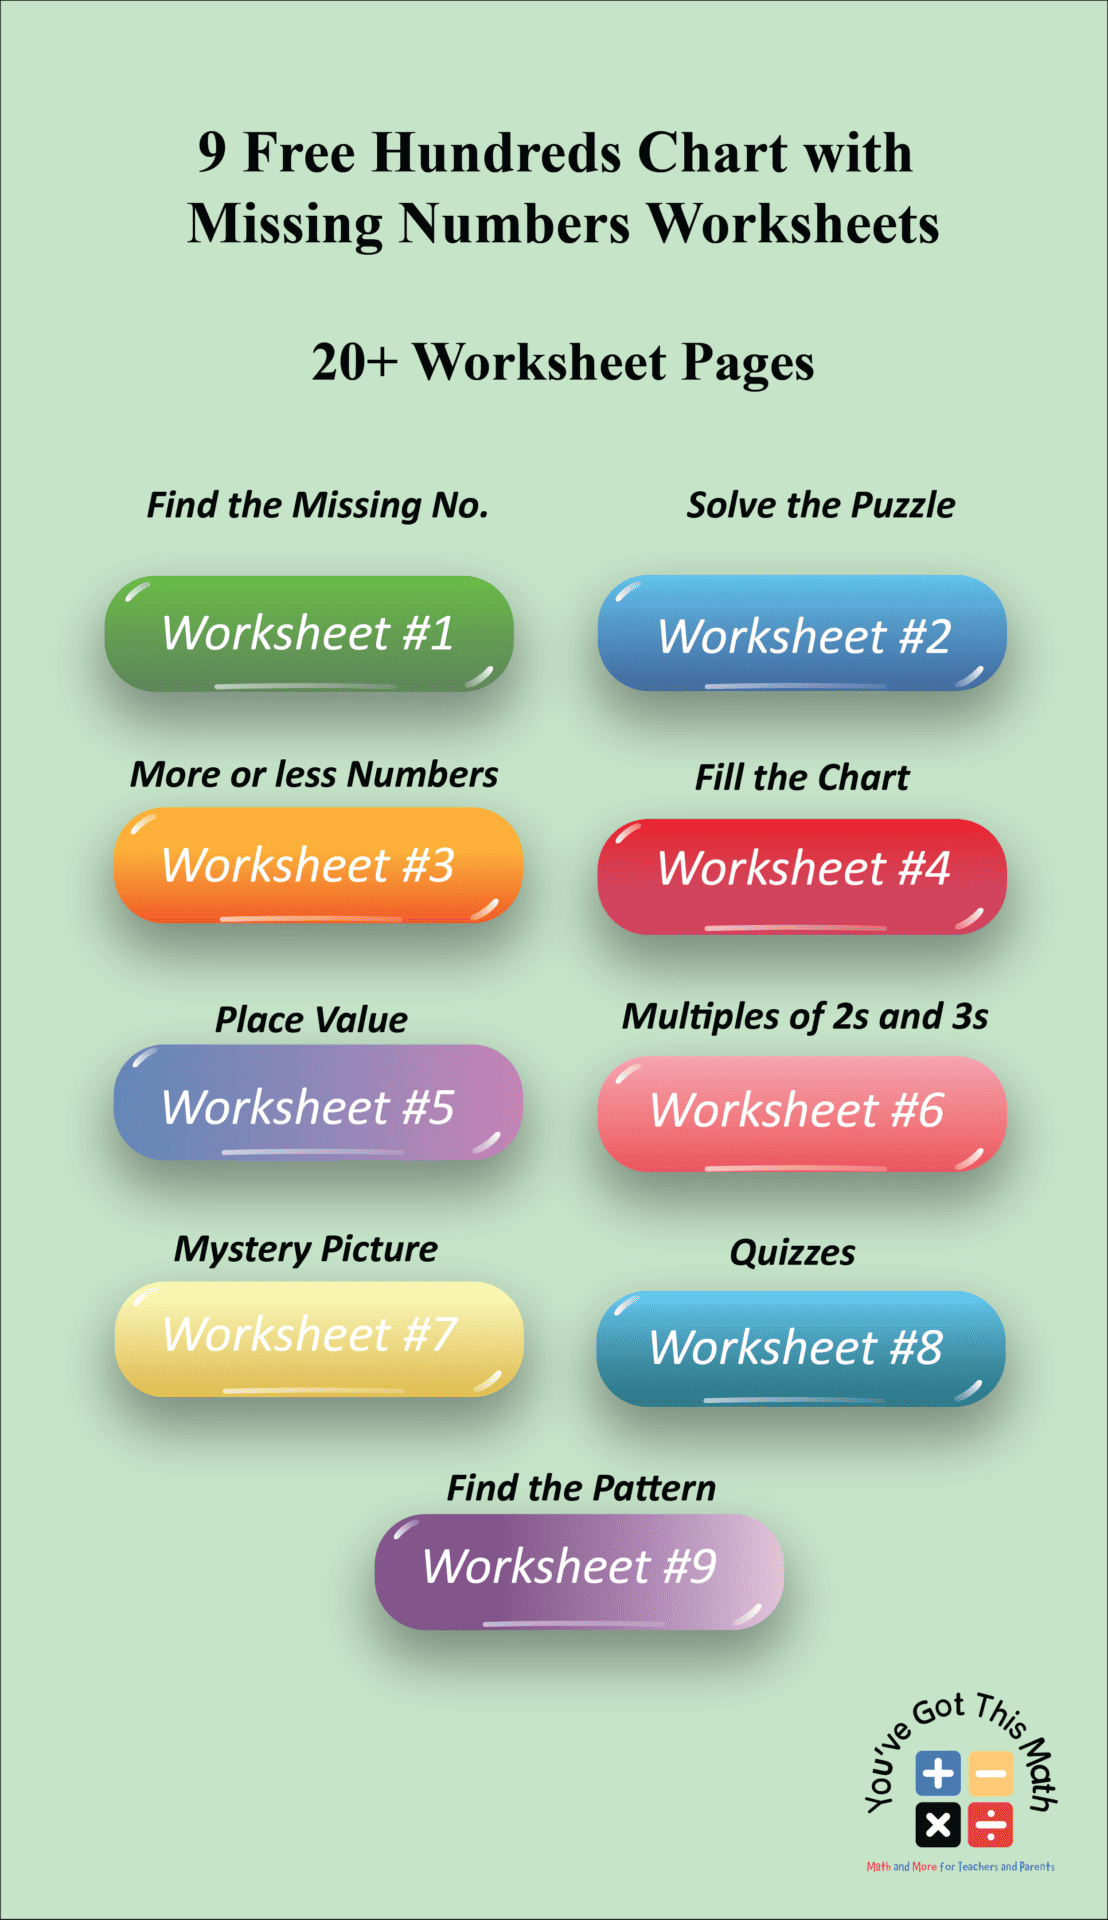 9-free-hundreds-chart-with-missing-numbers-worksheets